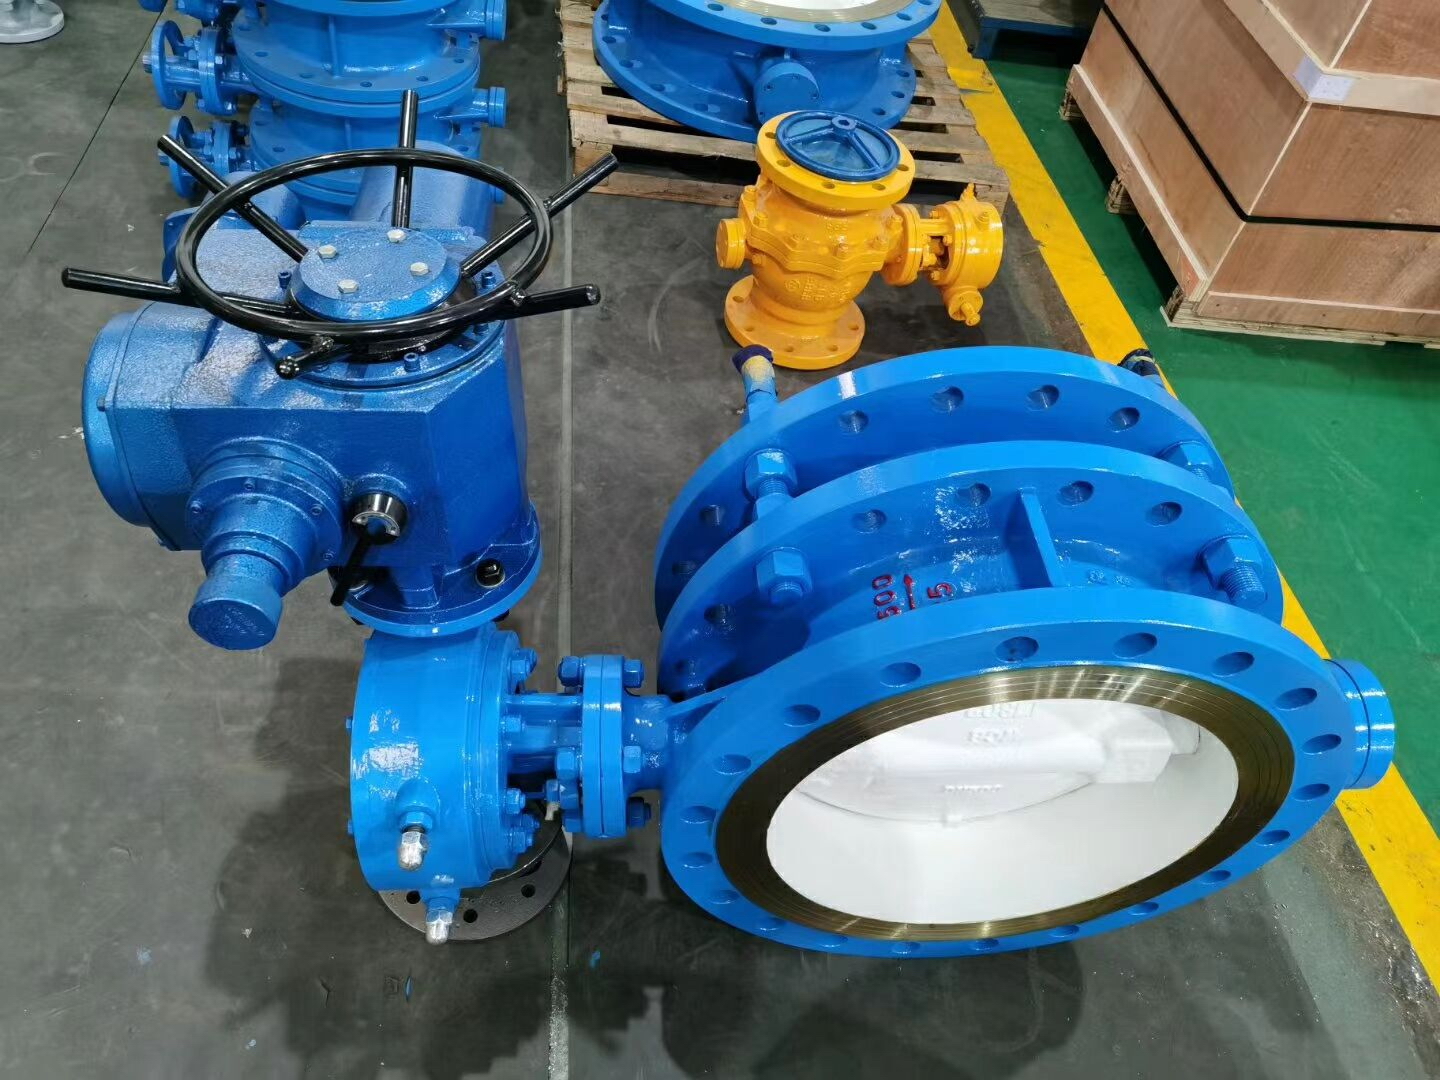 Chinese telescopic flange butterfly valve: a divine tool for controlling water flow, how much do you know?